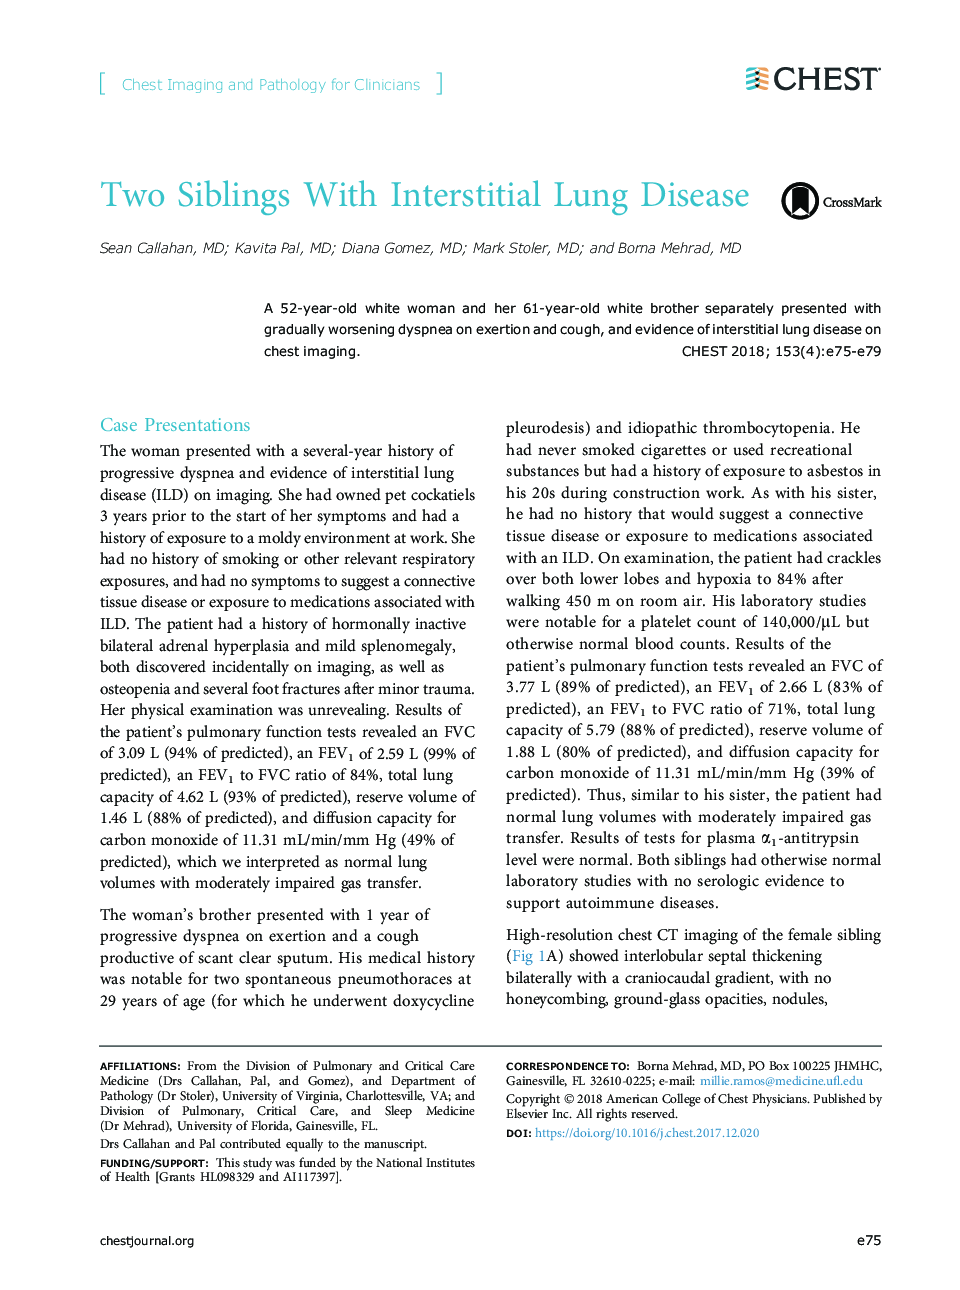 Two Siblings With Interstitial Lung Disease